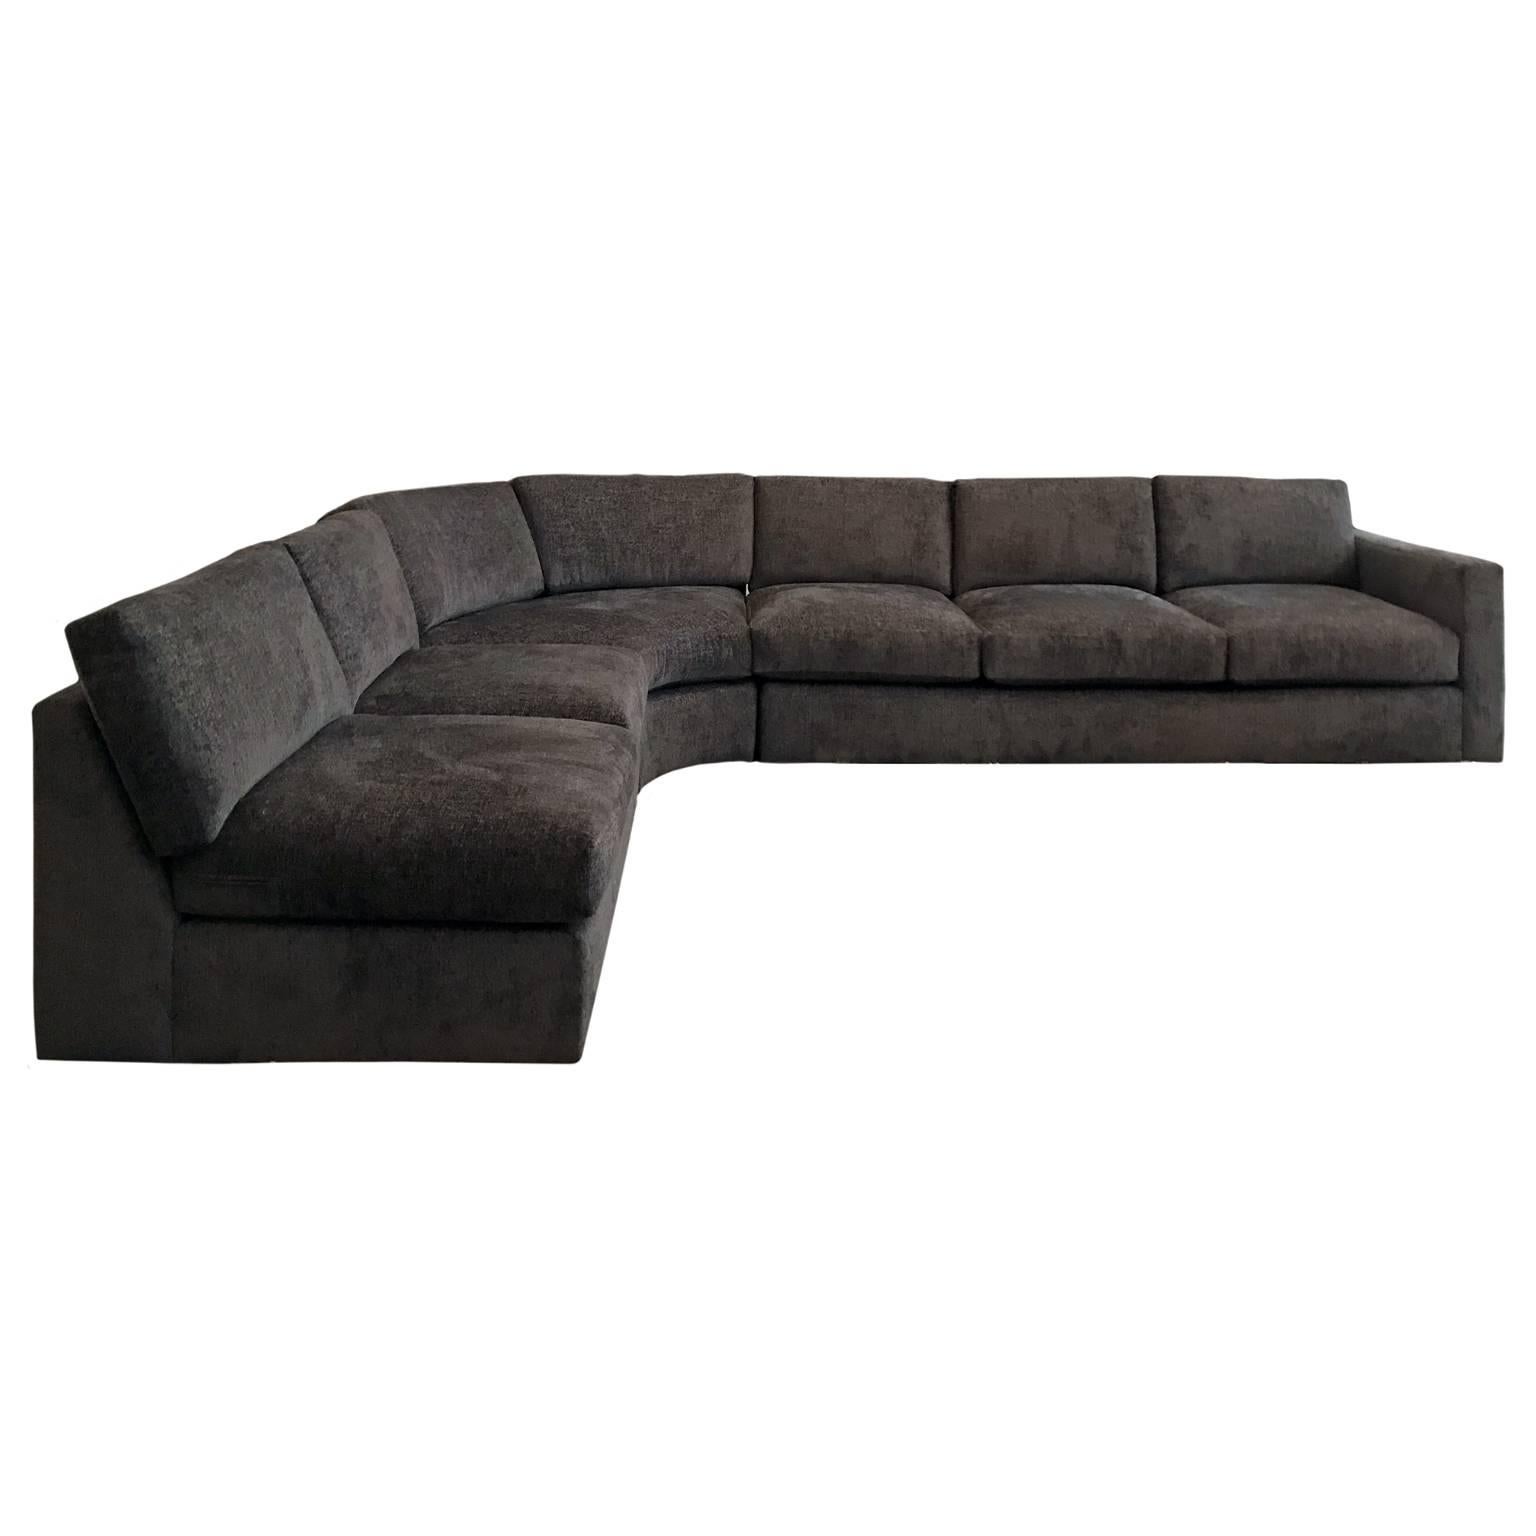 1970s Milo Baughman Signed Sectional Sofa Upholstered in Brown Chenille For Sale